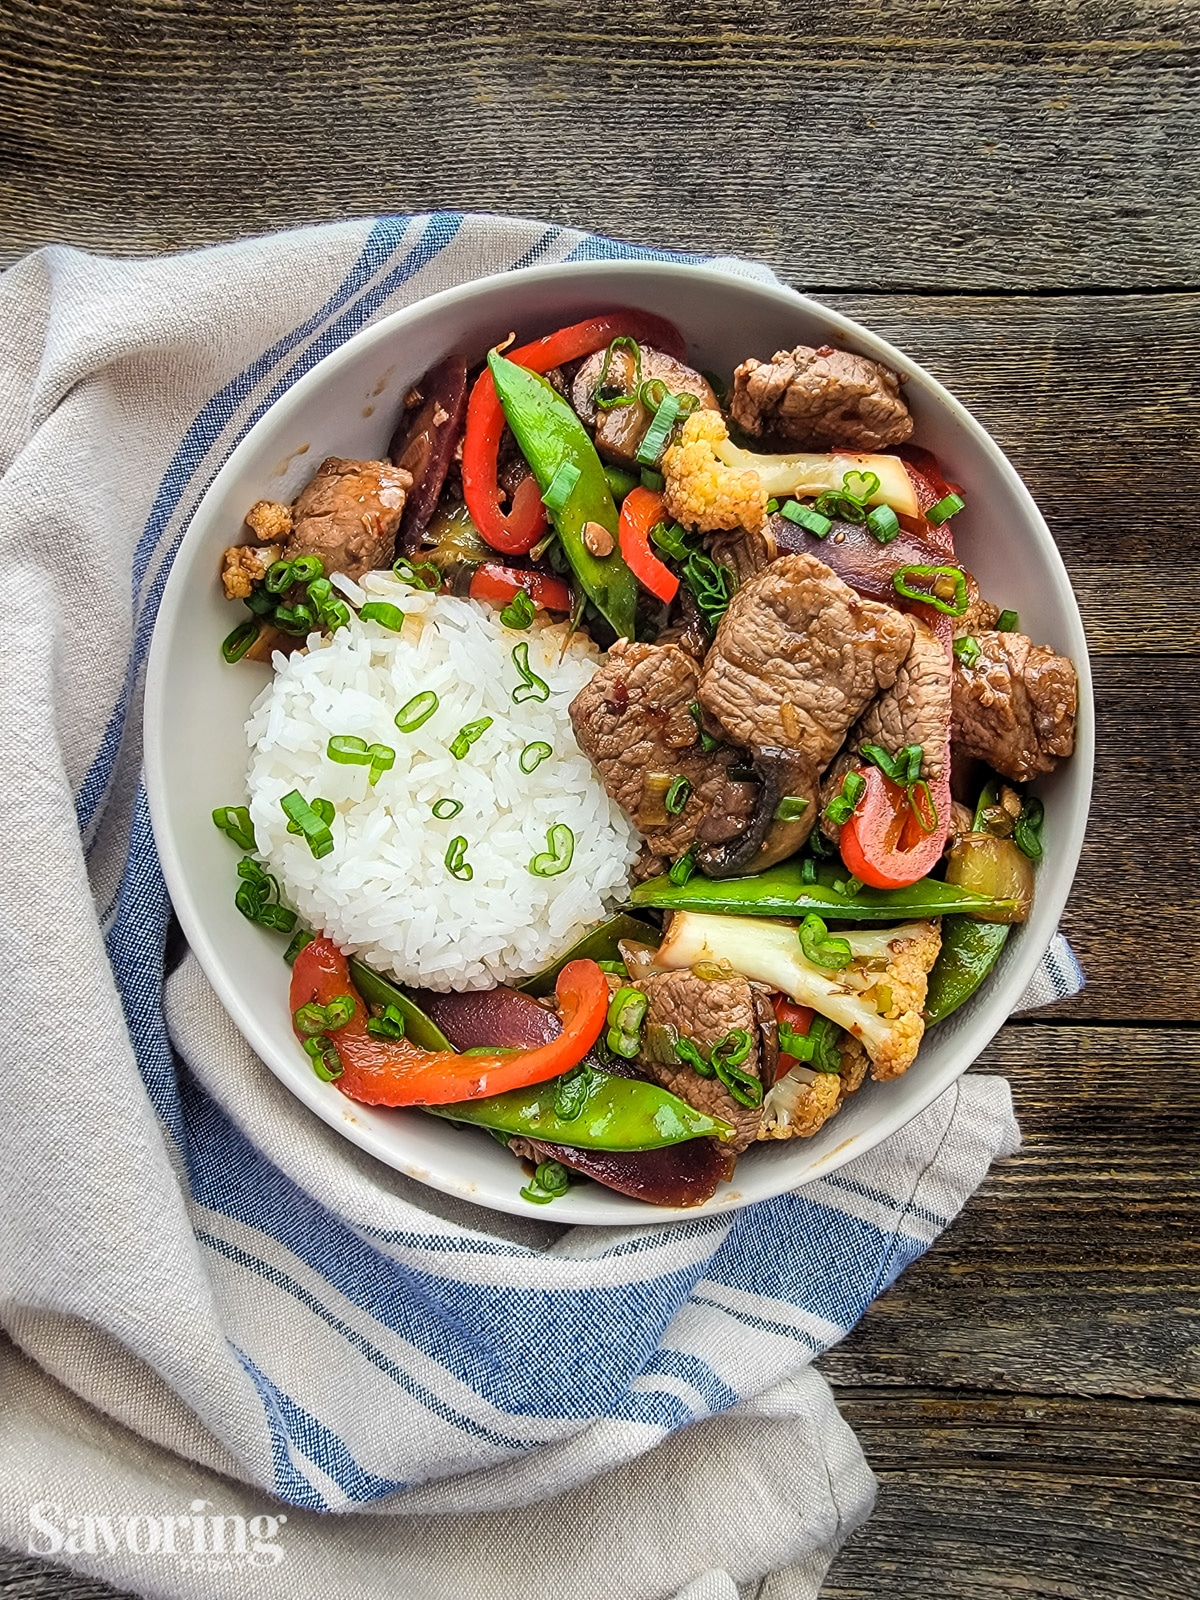 Stir-fry beef and vegetables in a brown sauce served with rice in a white bowl